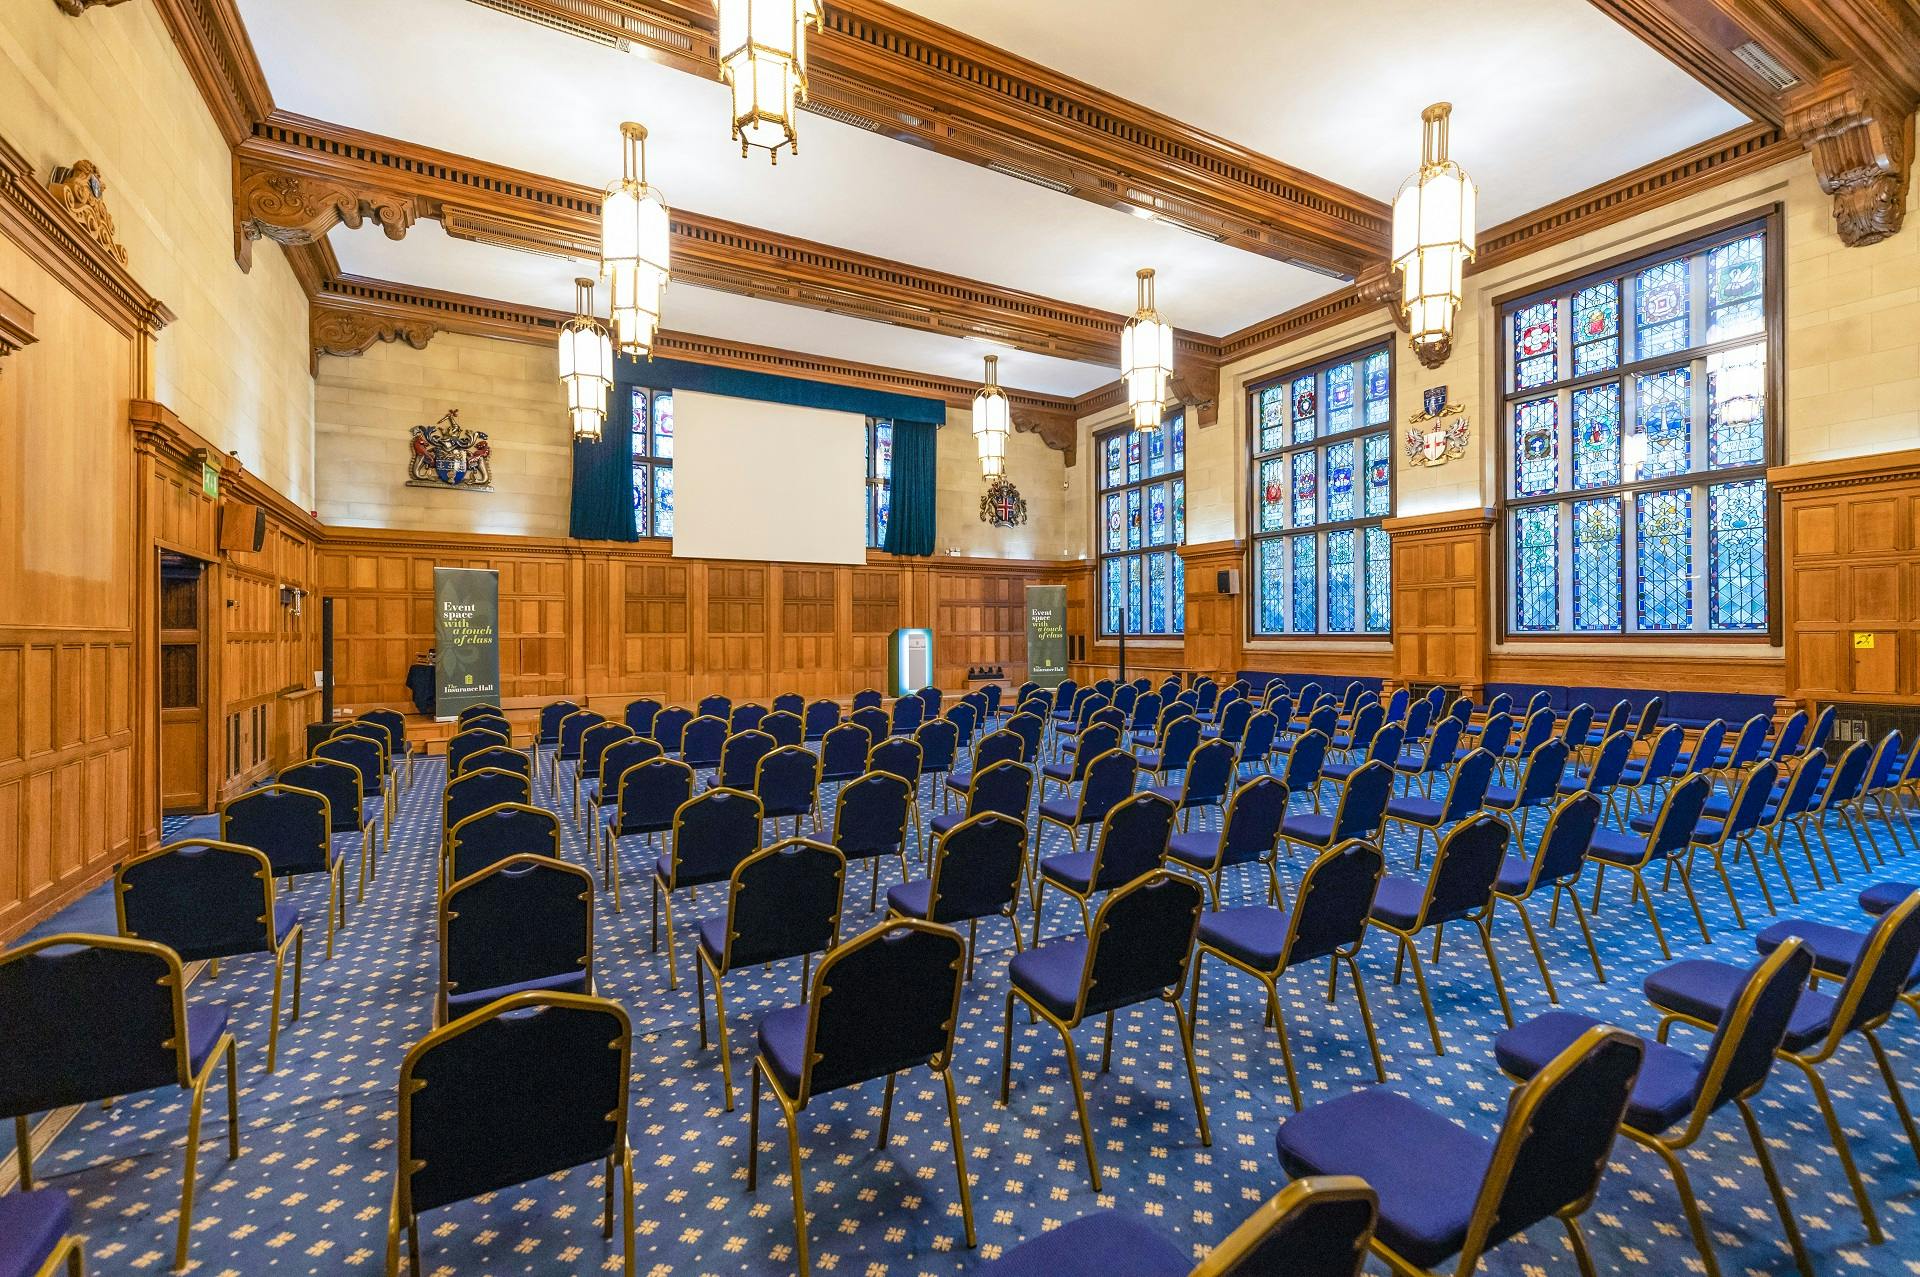 Unusual Conference Venues - The Insurance Hall